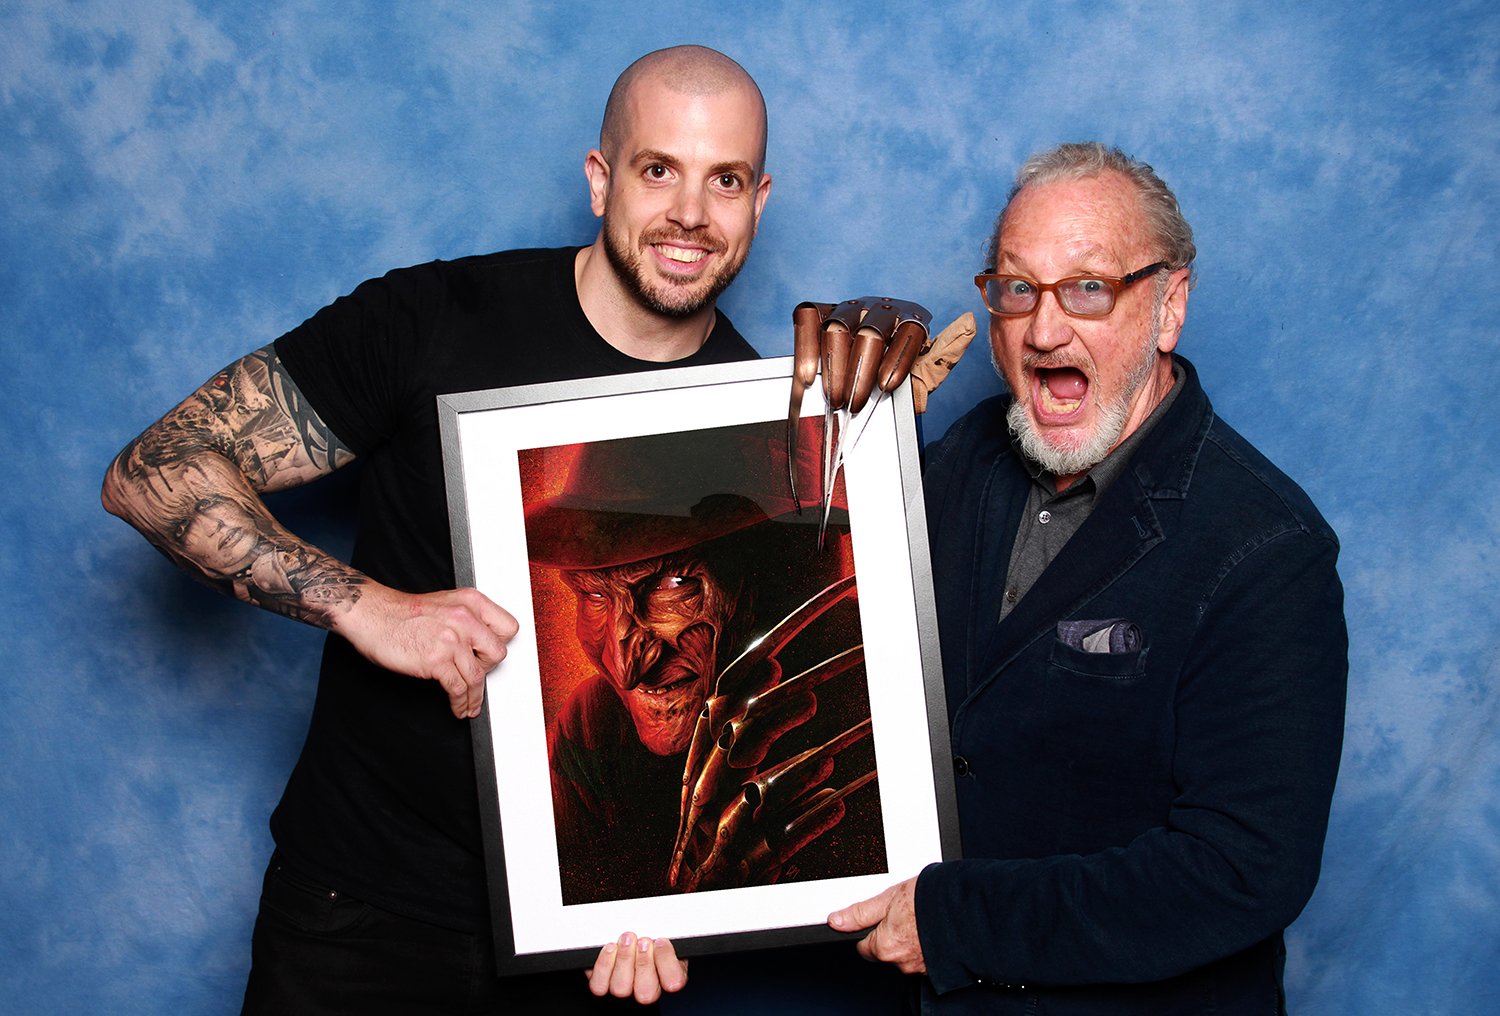 Painted portrait done for Showmasters. This was signed by Robert Englund (aka Freddy) and auctioned off. Medium: Acrylic paints on art board. By Craig Mackay.